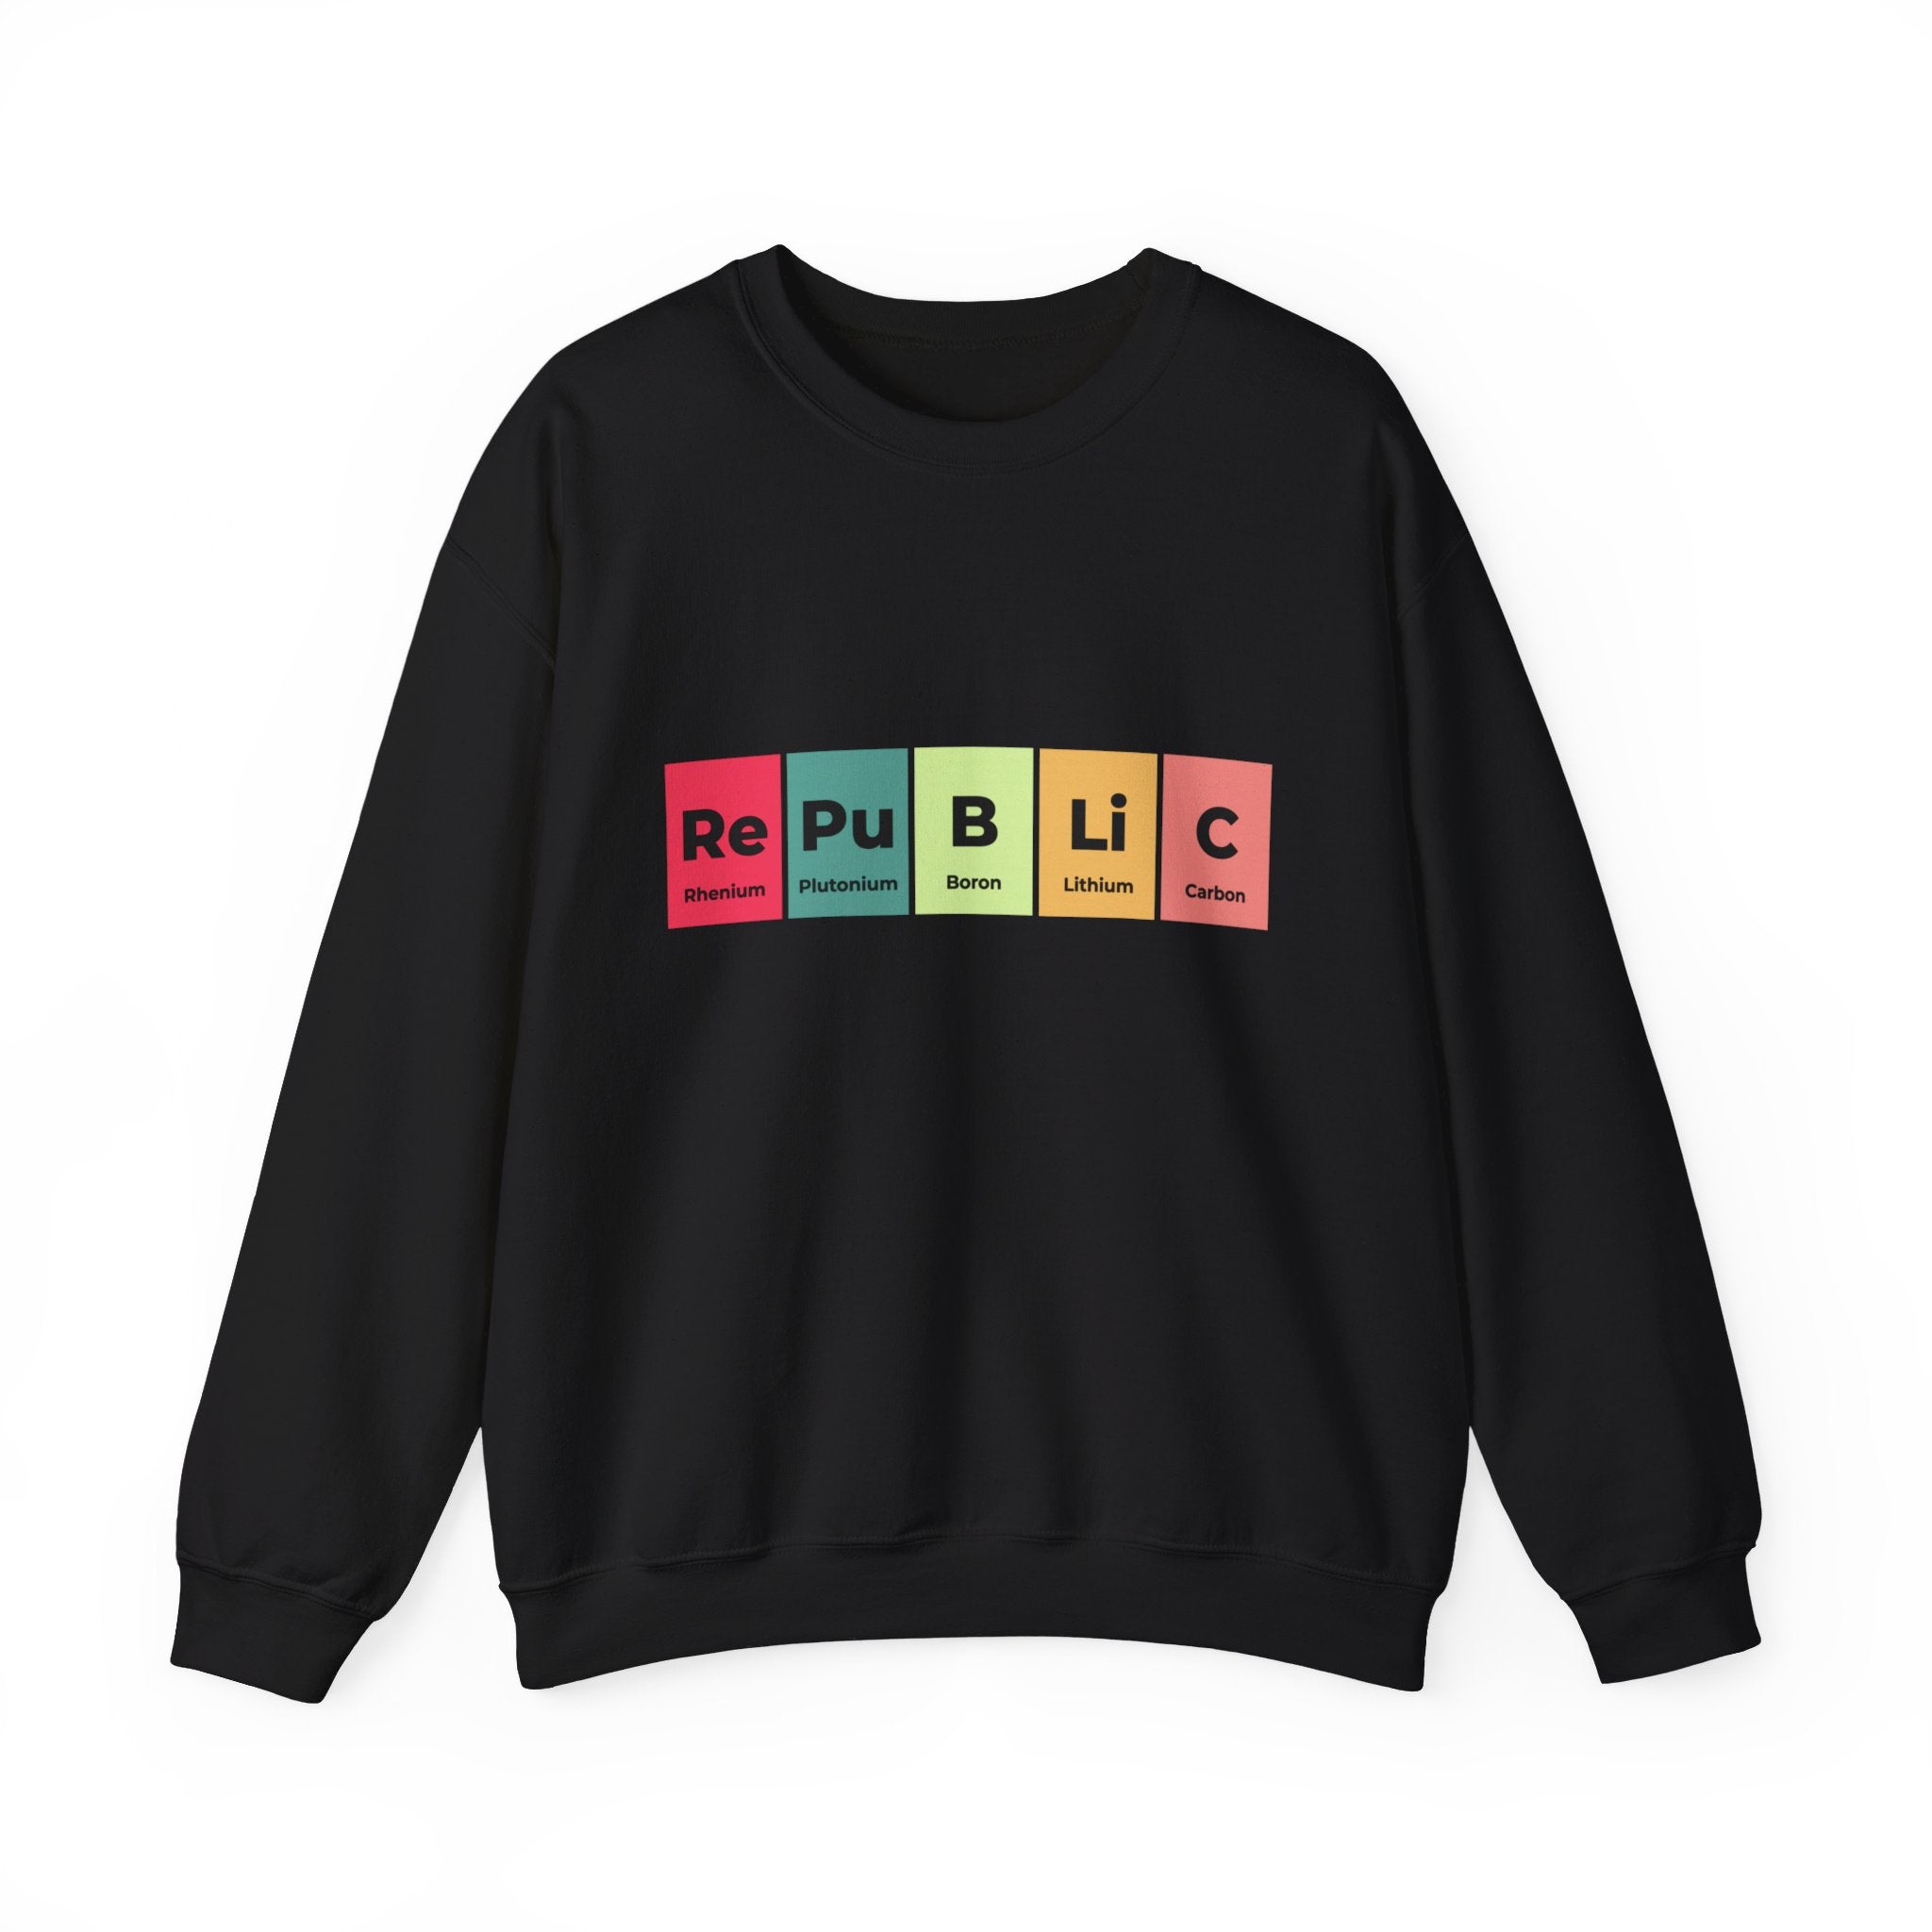 The Republic - Sweatshirt is a cozy black winter essential, featuring a colorful design with the word "Republic" cleverly spelled out using elements from the periodic table: Rhenium, Plutonium, Boron, Lithium, and Carbon.